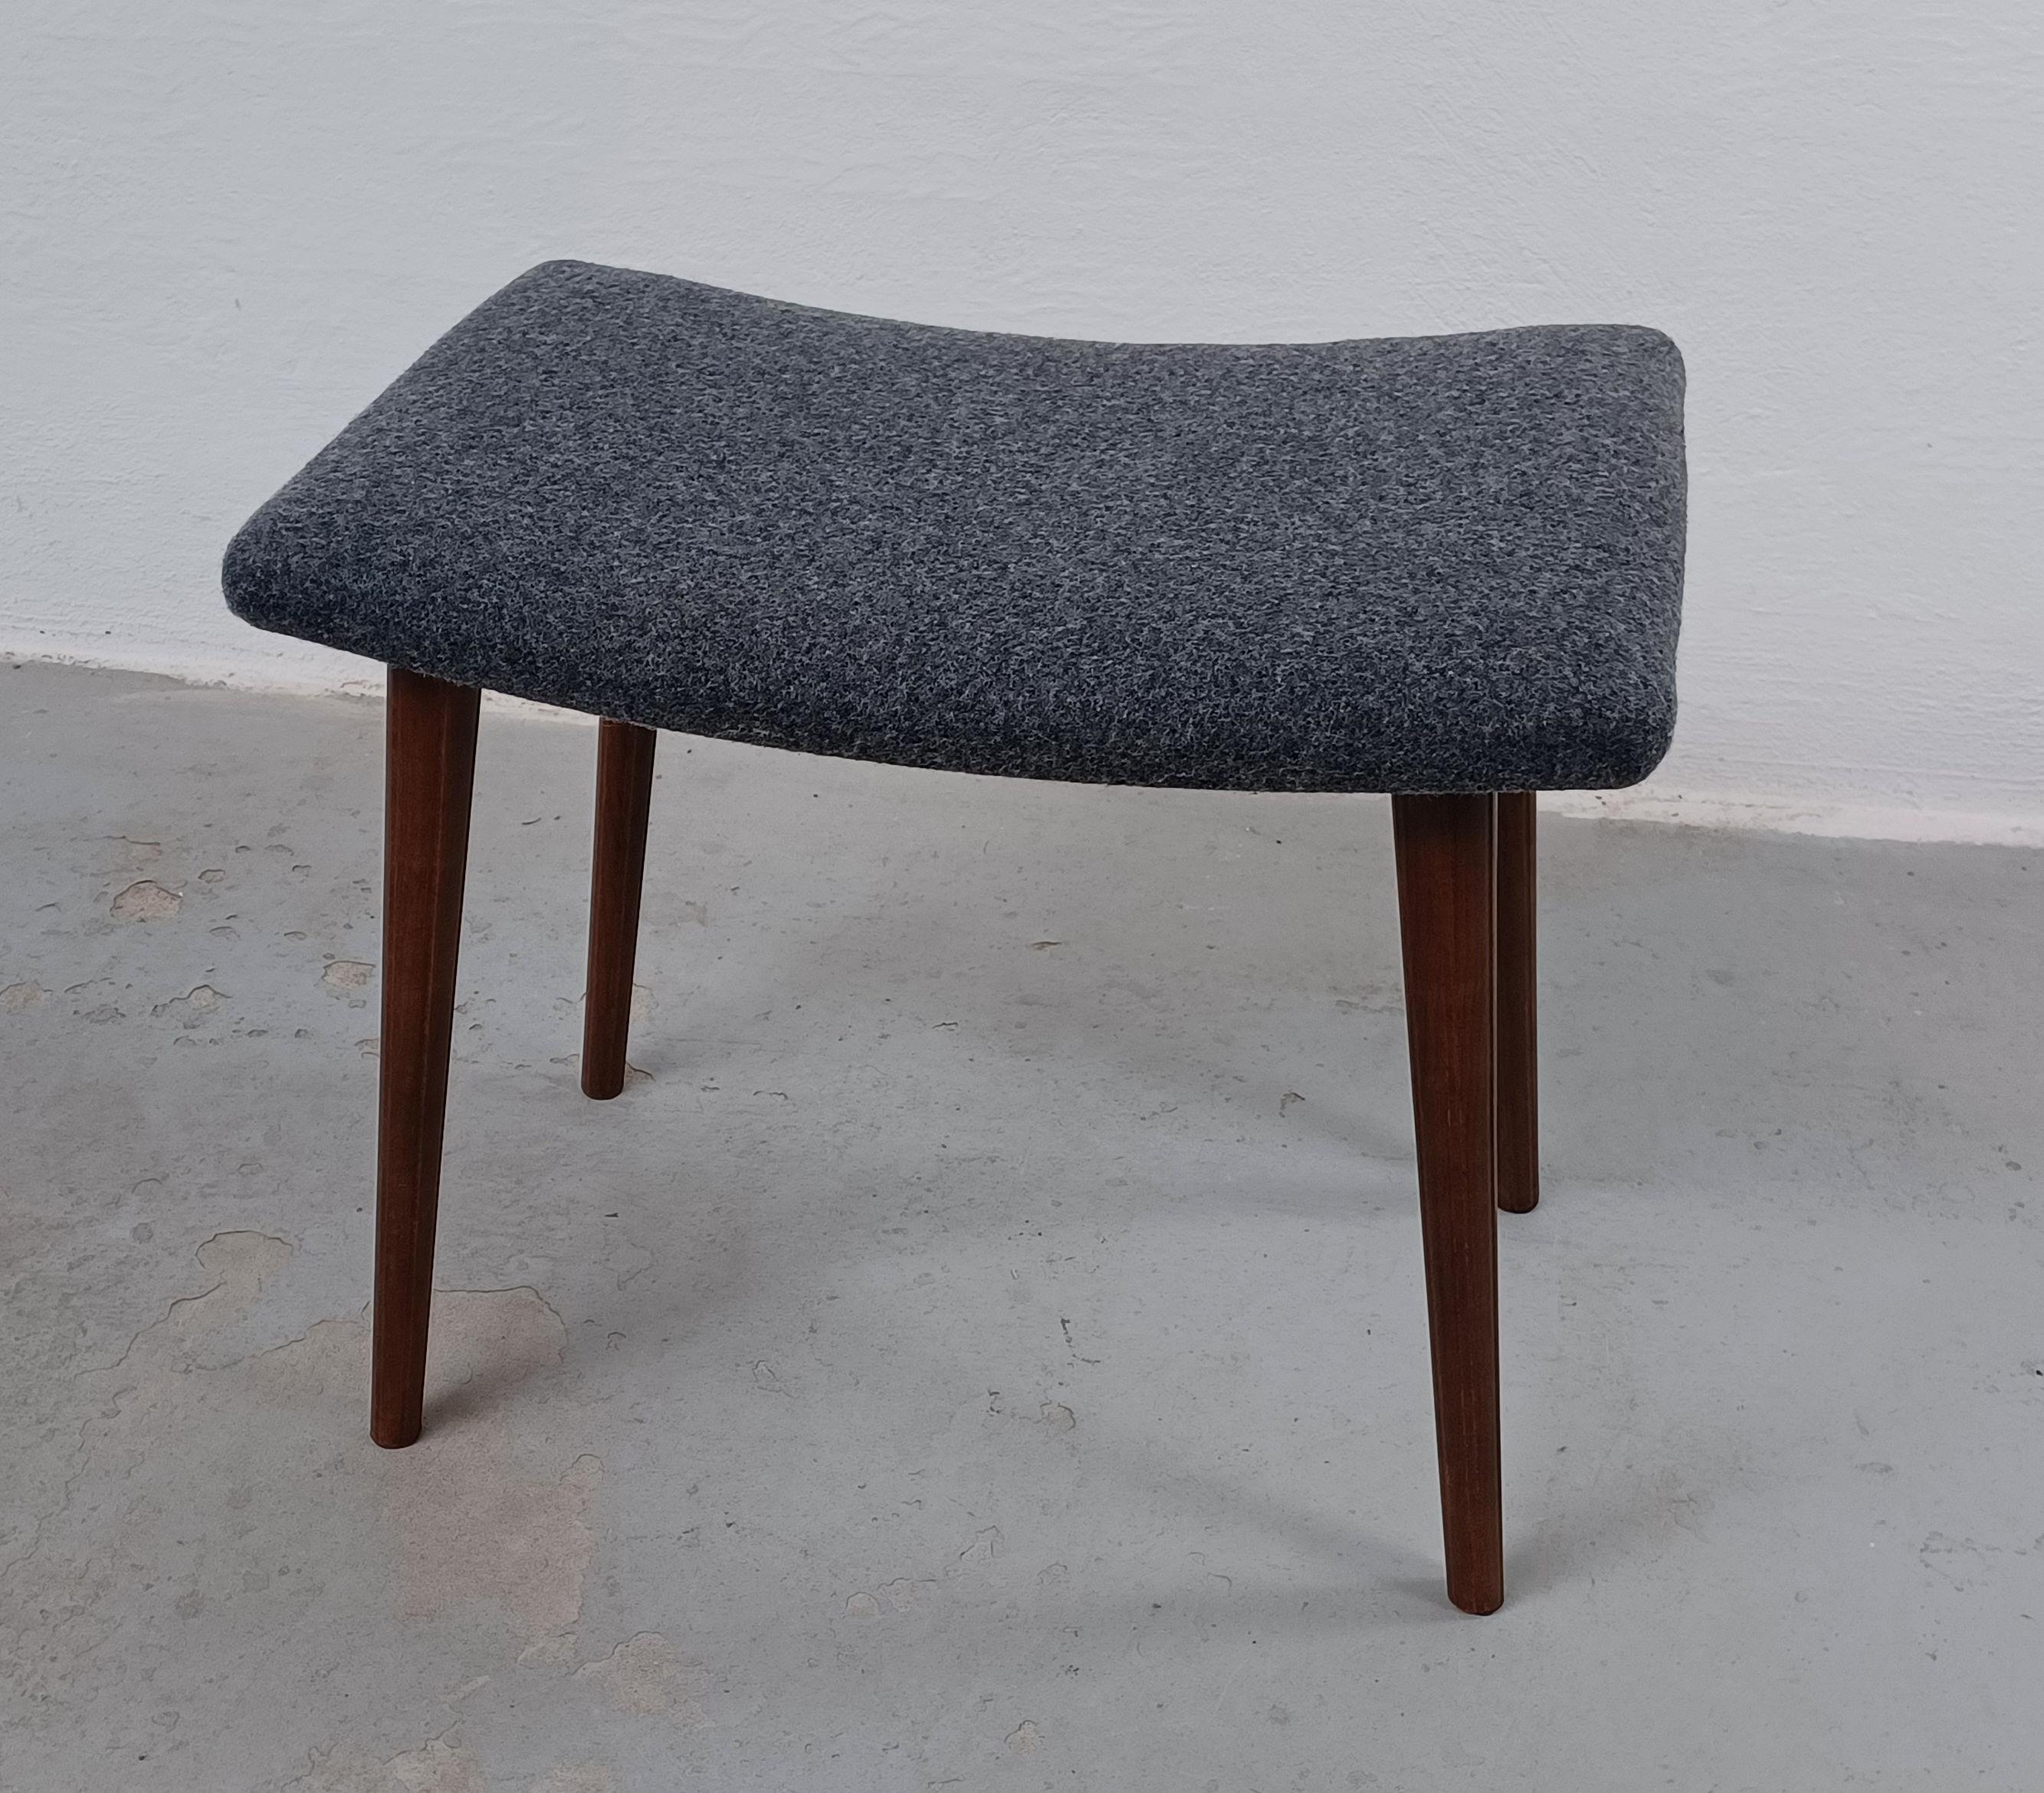 1950s Fully restored danish stool.

The stool feature a simple and elegant design with it's curved upholstered seat on top of it's four fluted chair legs in tanned beech and newly reupholstery in good condition.

The stool has been checked and